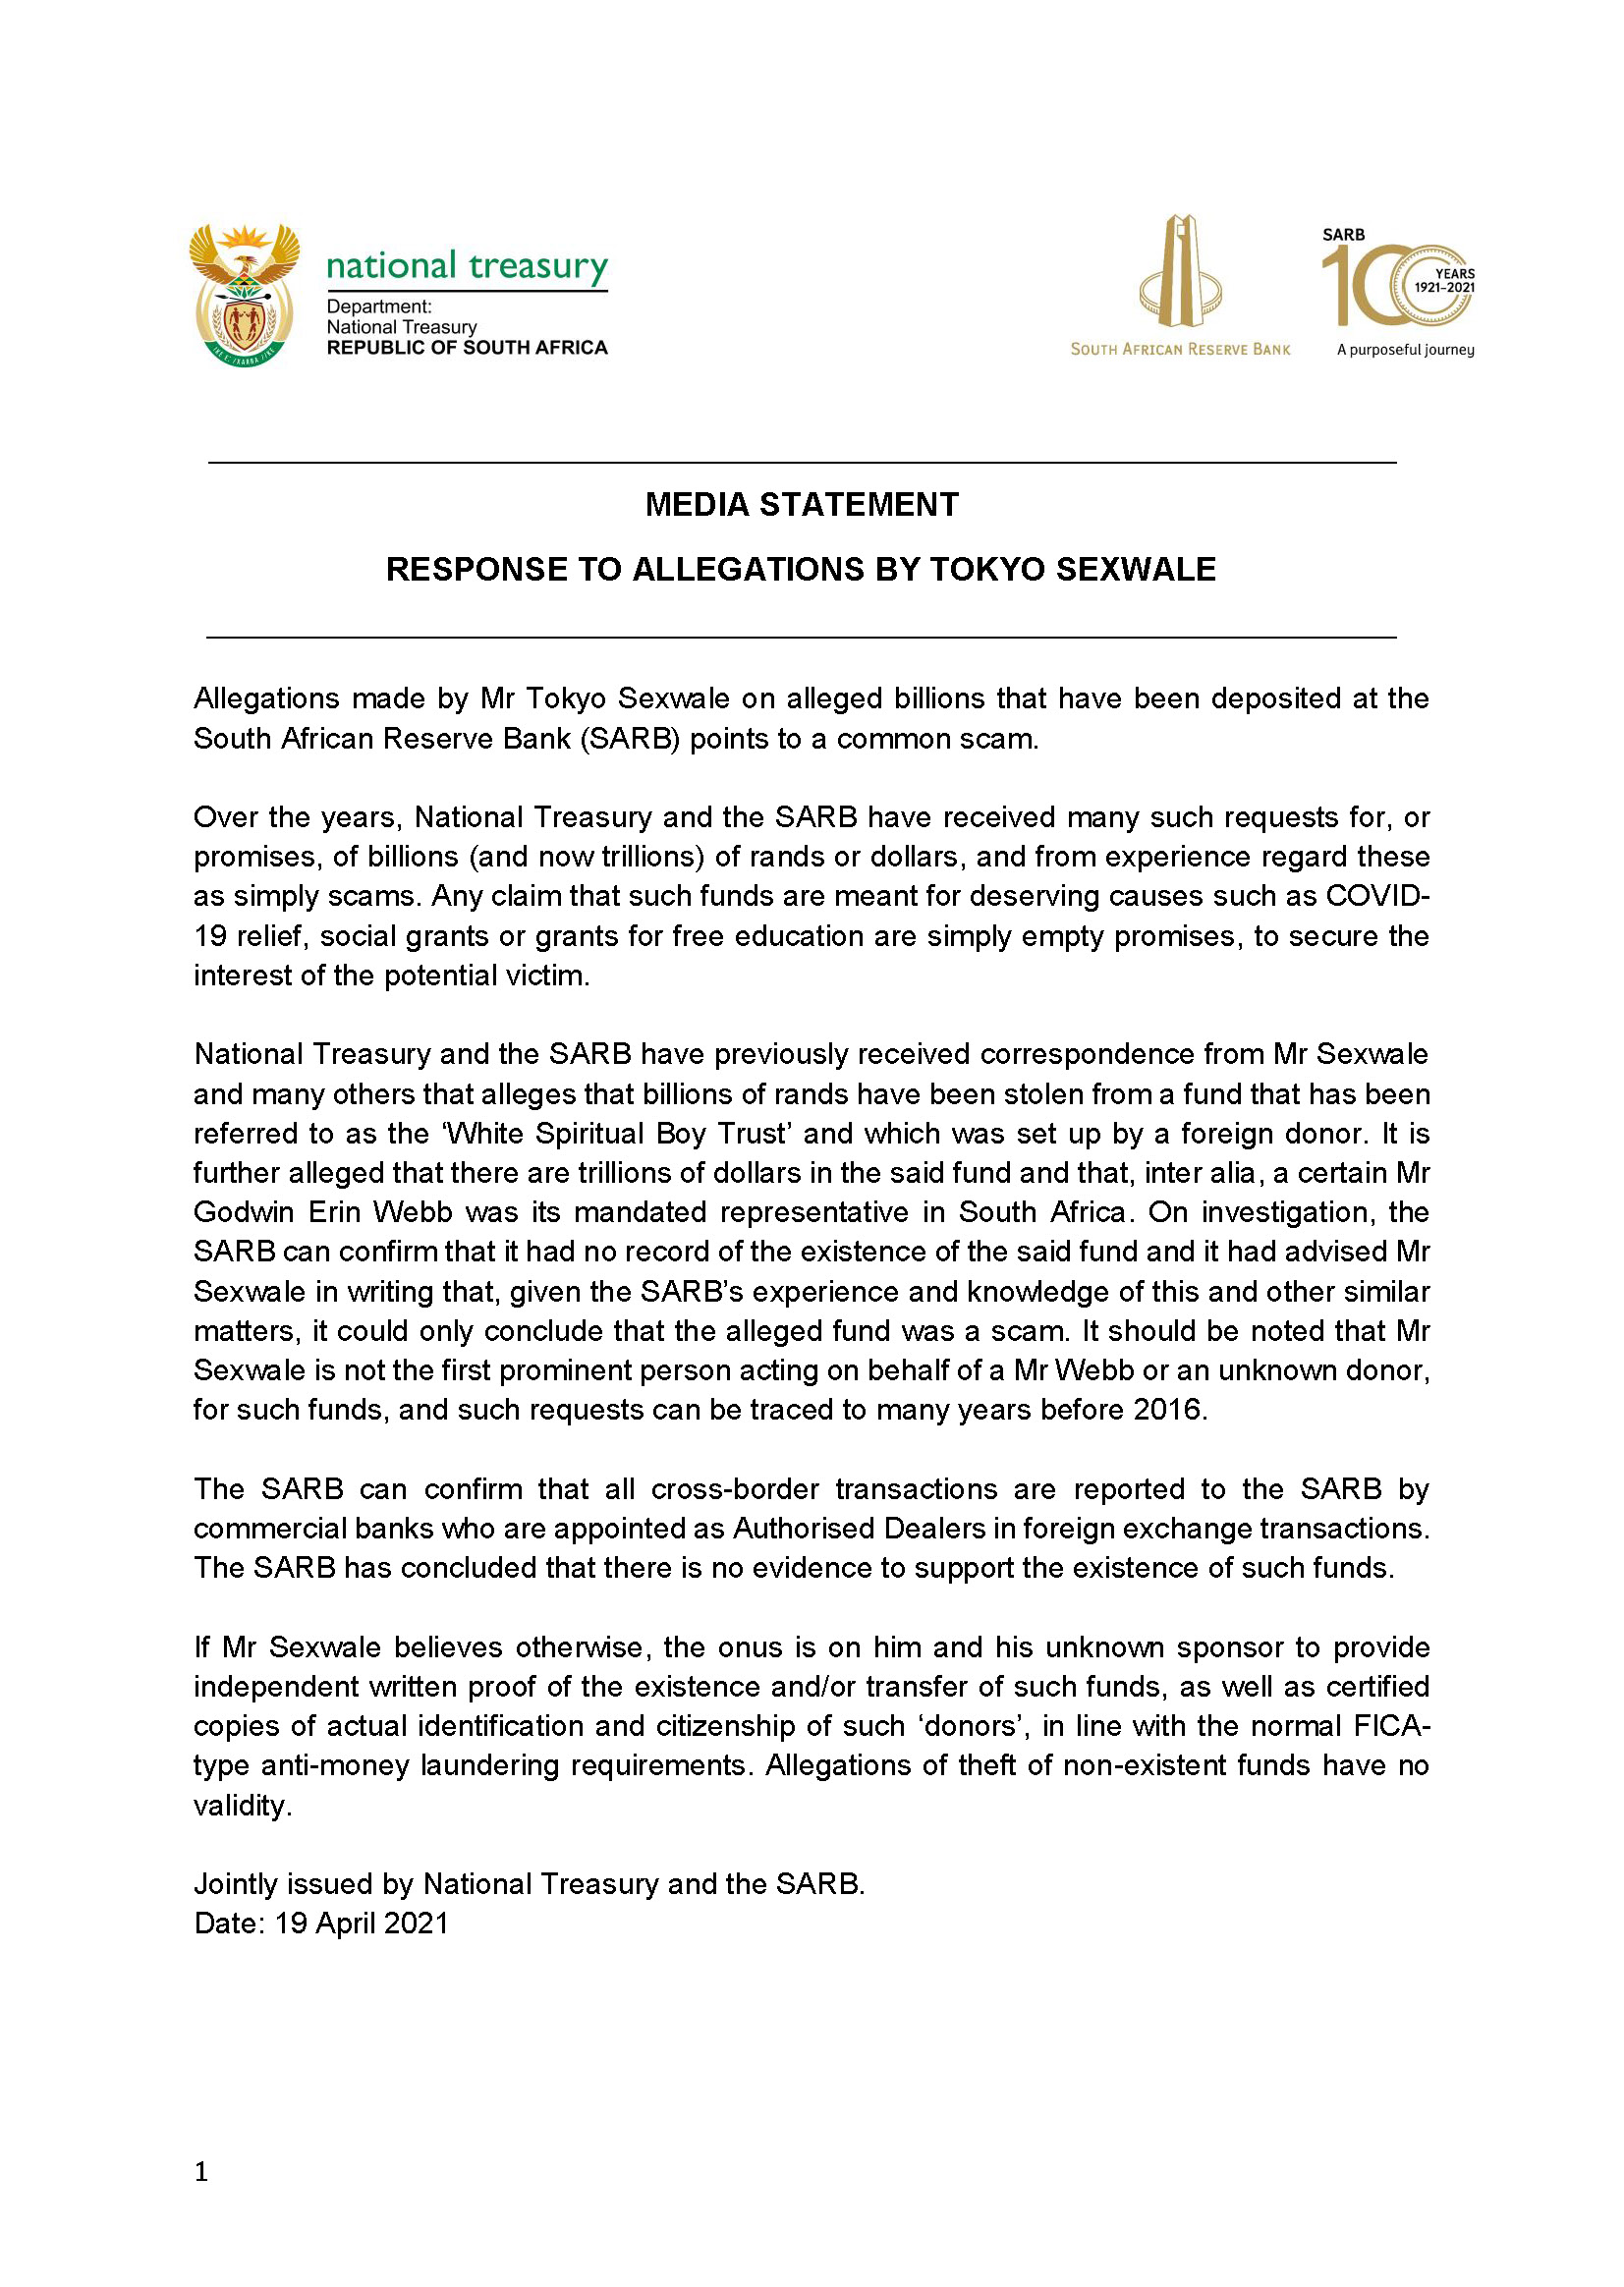 sa reserve bank on twitter media statement treasuryrsa and sareservebank have released a joint response to allegations by mr tokyo sexwale for full https t co s7ejqtmsee amgtqgqyd4 assets liabilities stockholders equity preparation of profit loss account balance sheet